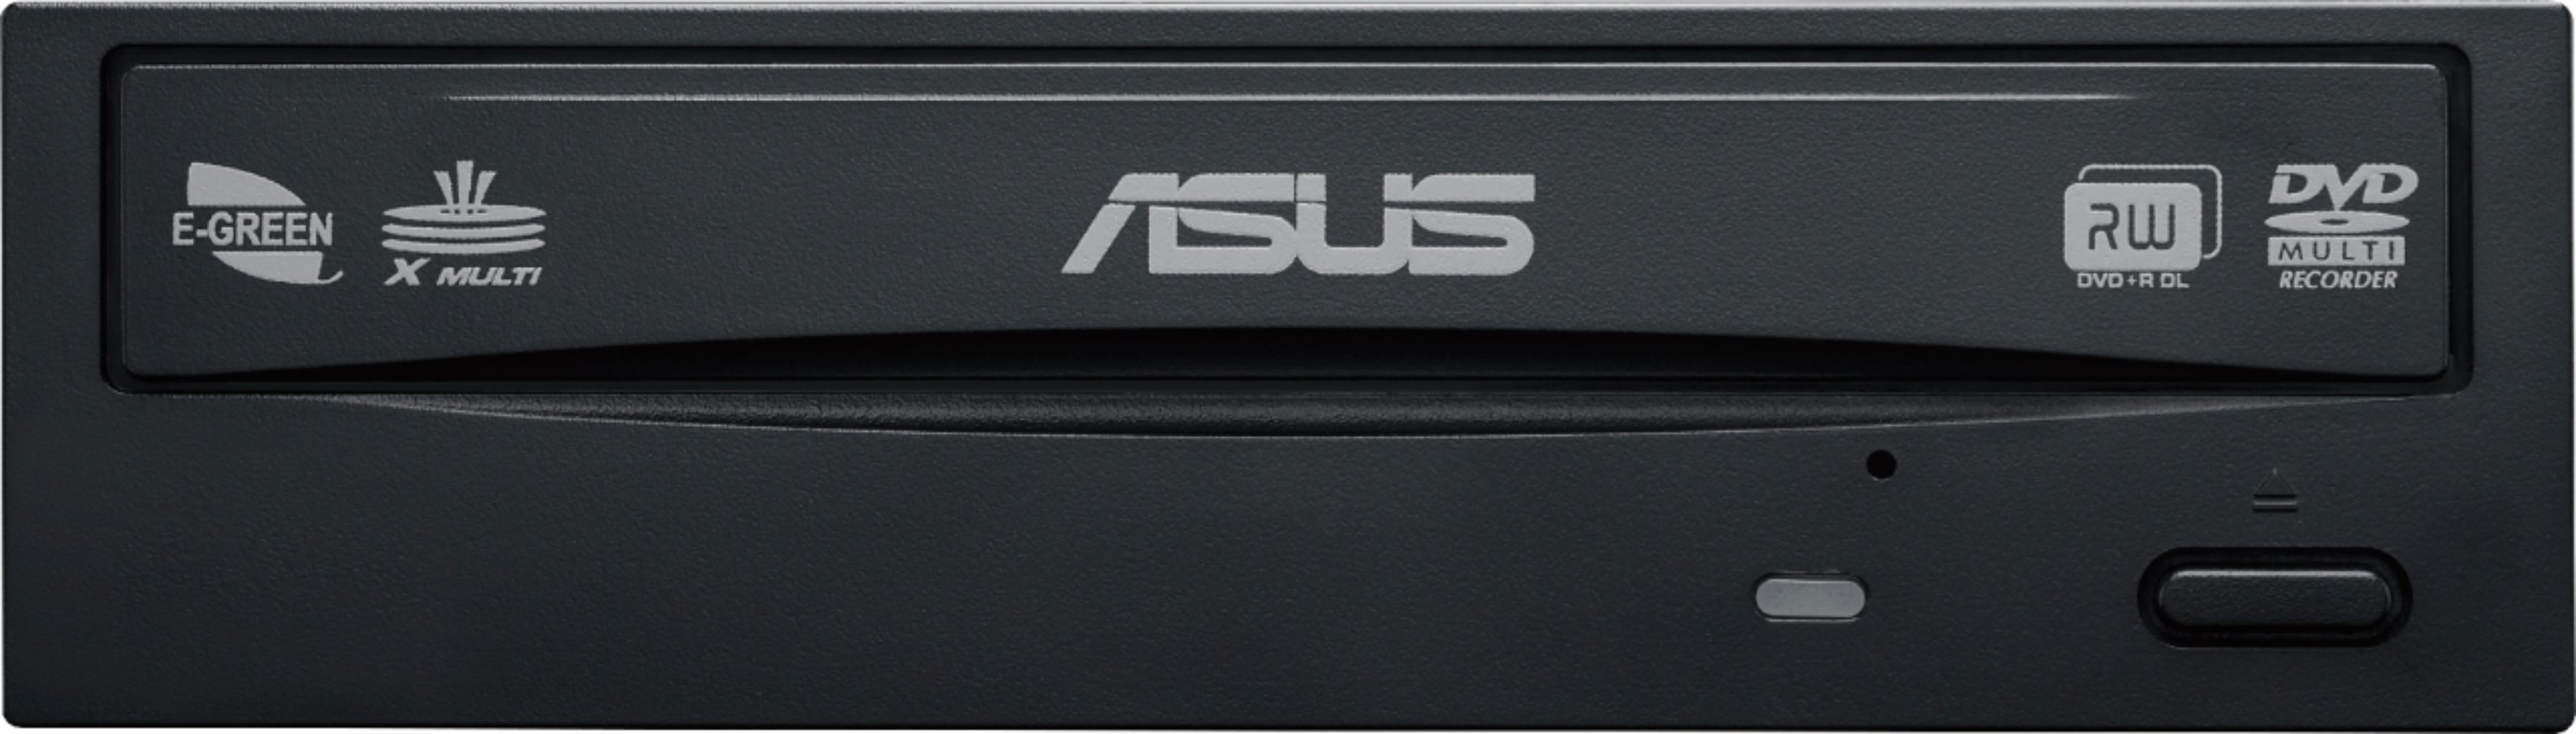 USB 2.0 External CD/DVD Drive for Asus A53e-eh31 